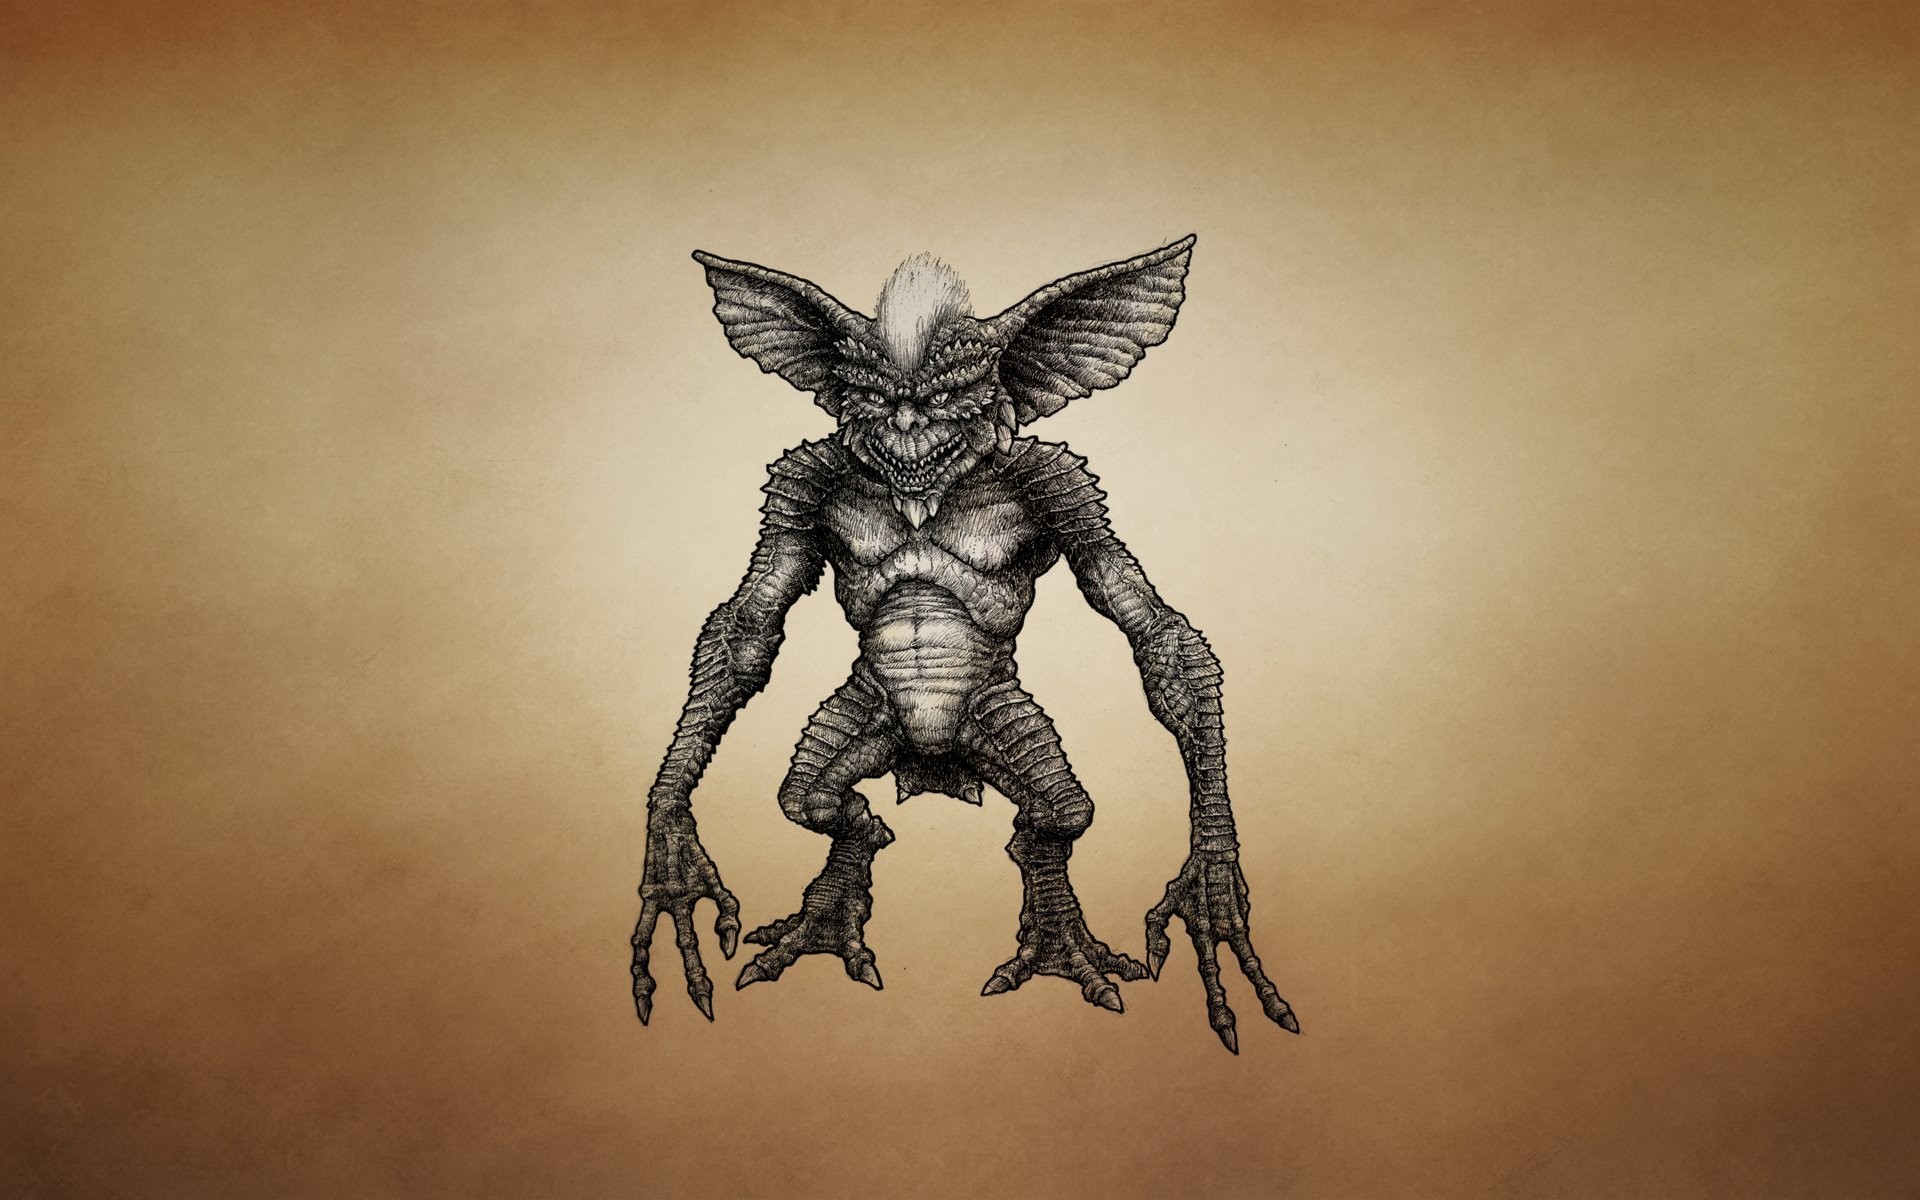 1920x1200 gremlins gremlins mythical creature dusky background mohawk toothy eared